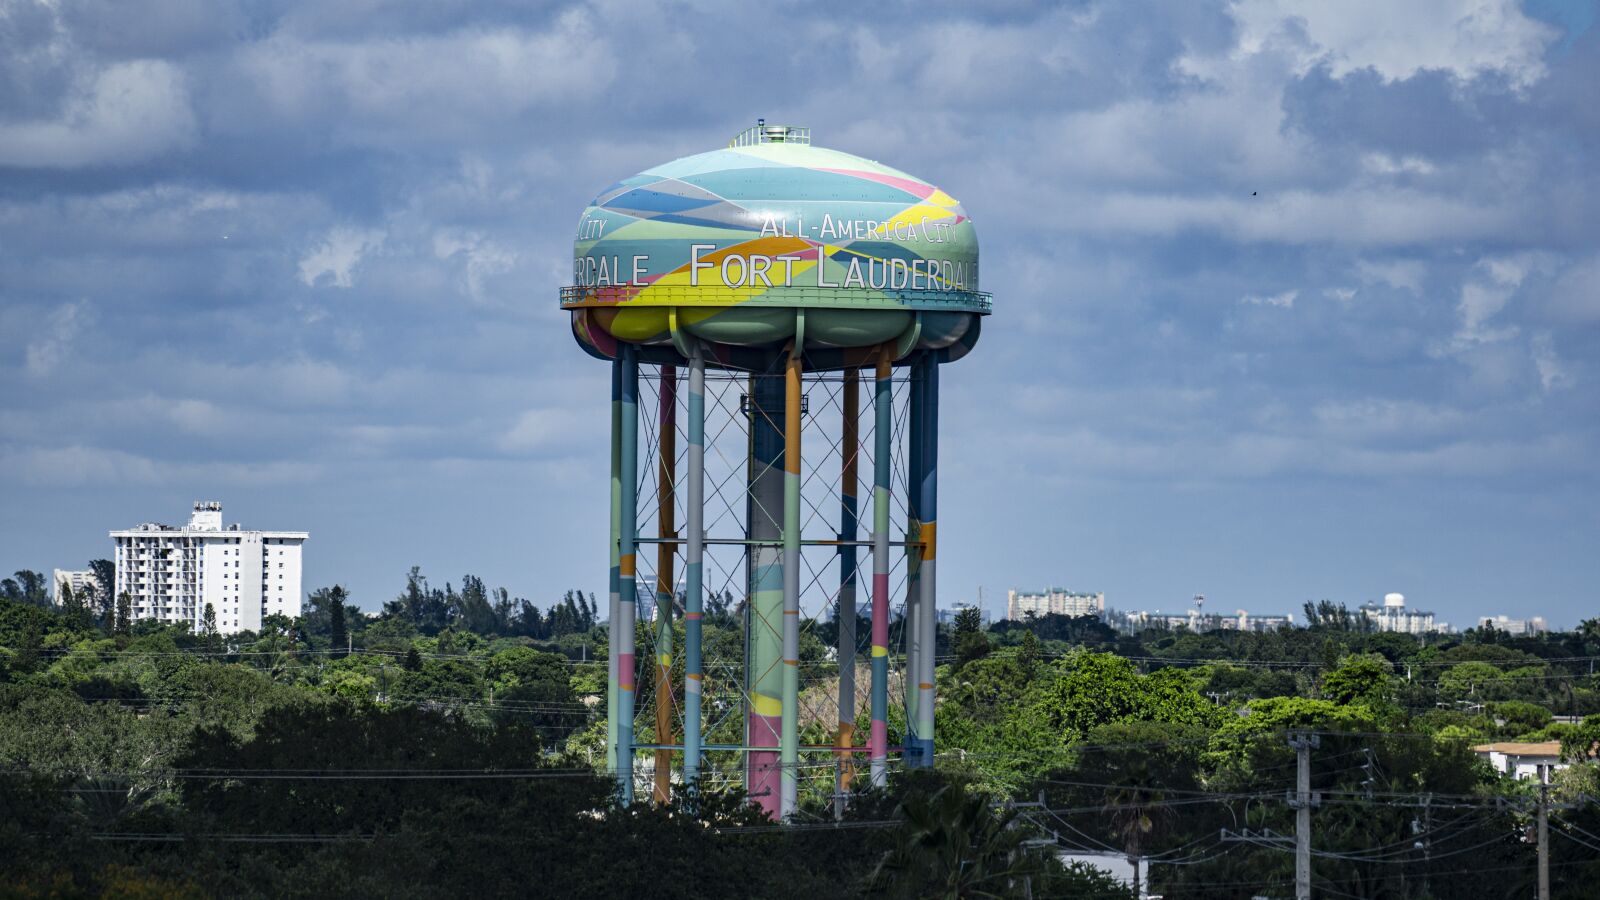 Sony a6000 sample photo. Water tower, fort lauderdale photography